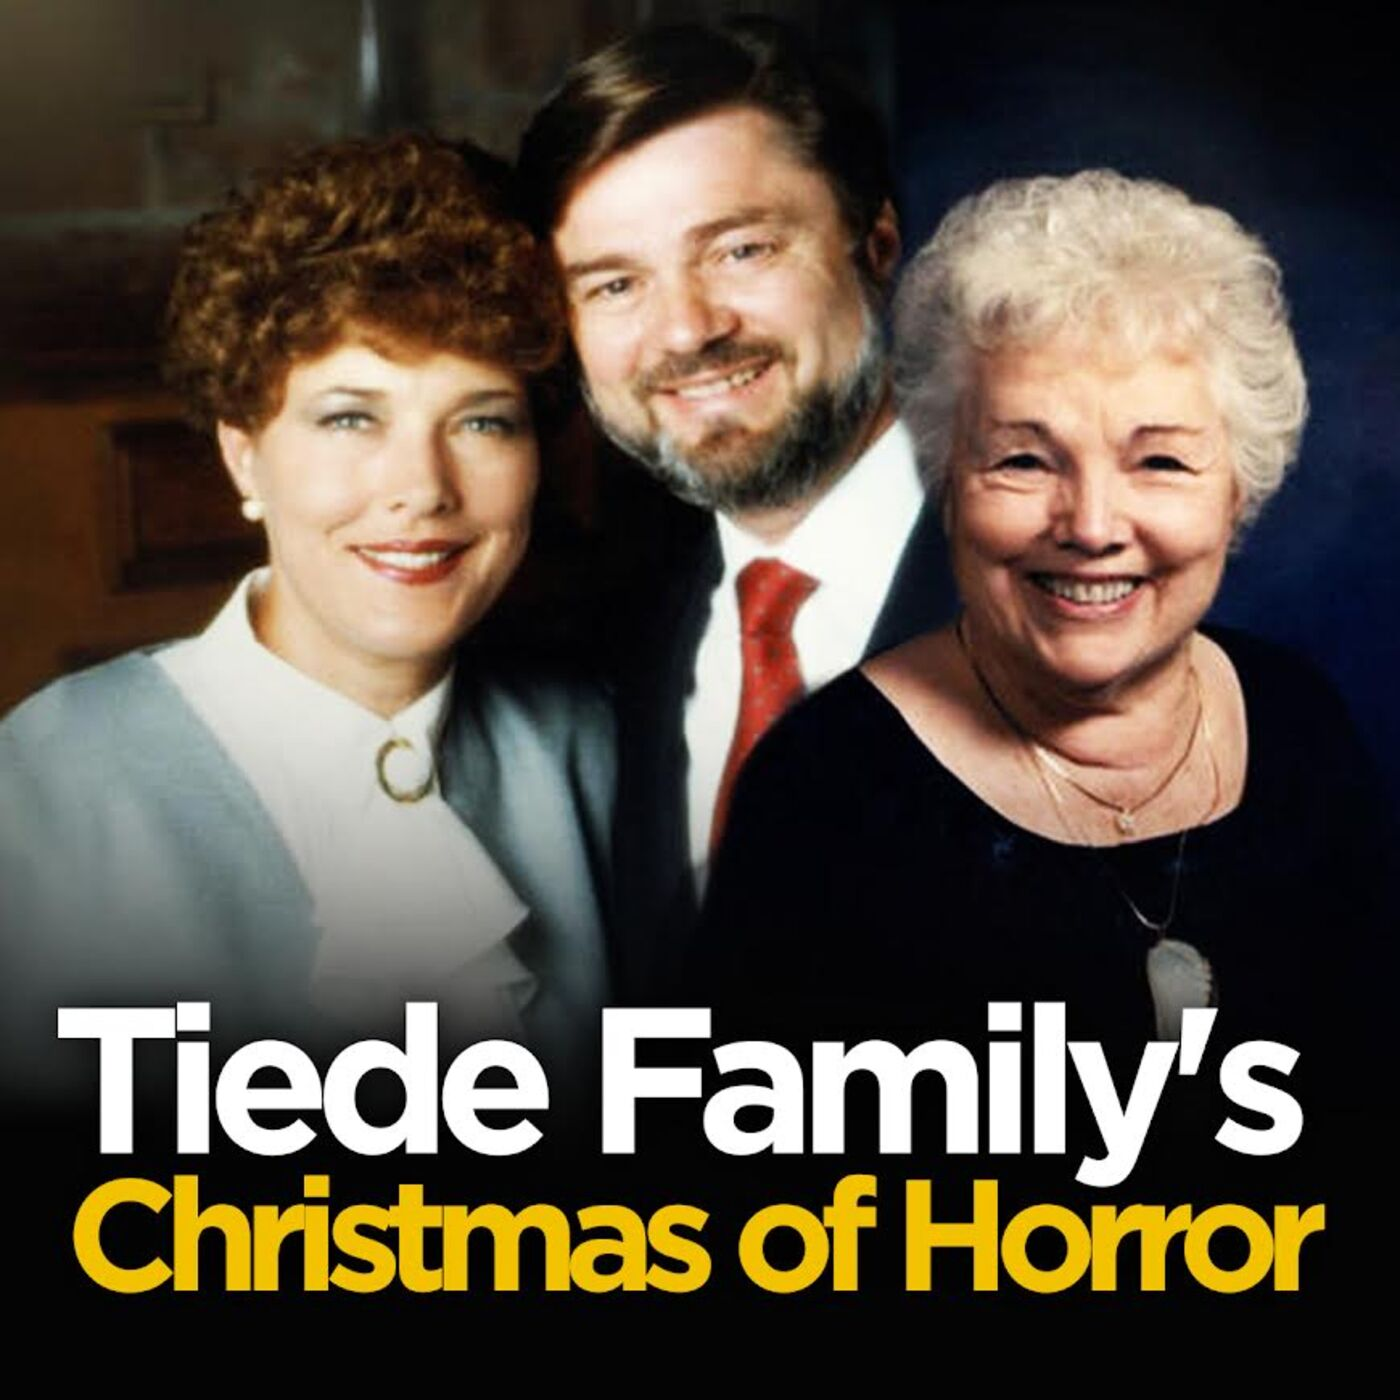 A Christmas Tragedy: the Story of the Tiede Family